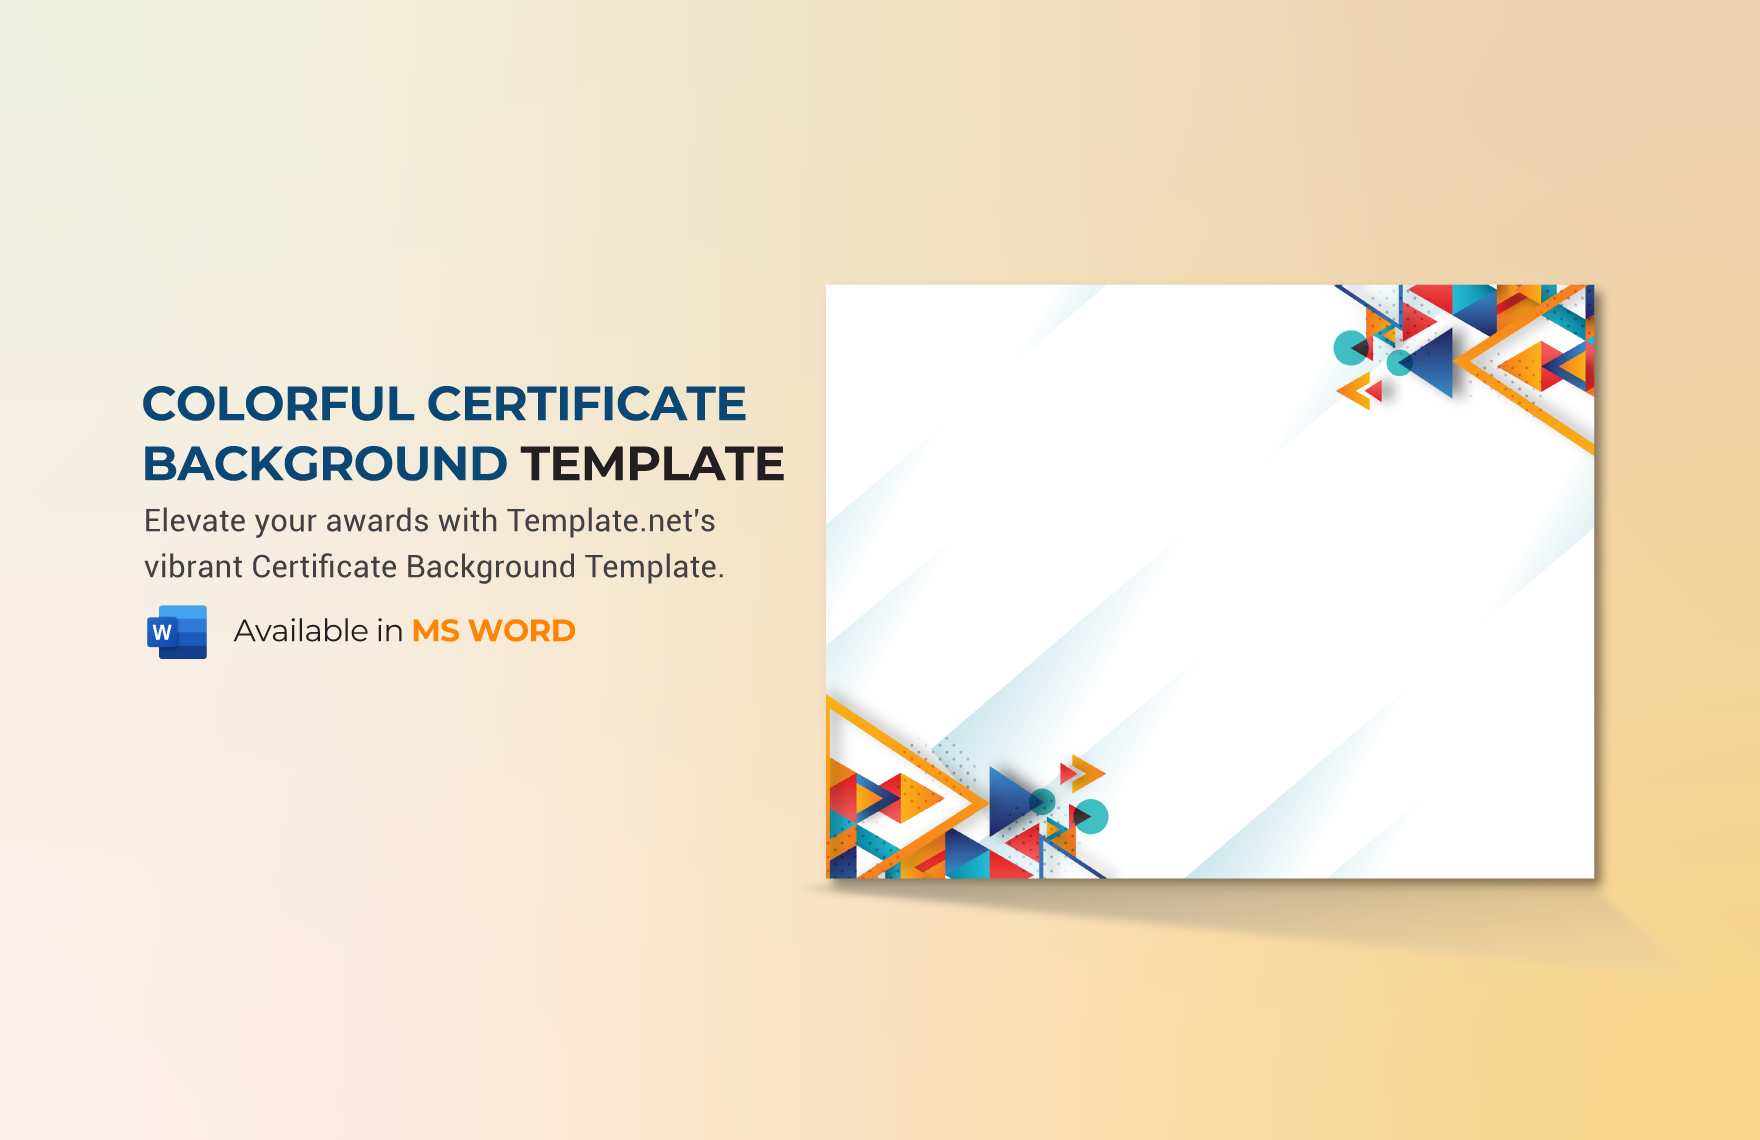 Colorful Certificate Background Template